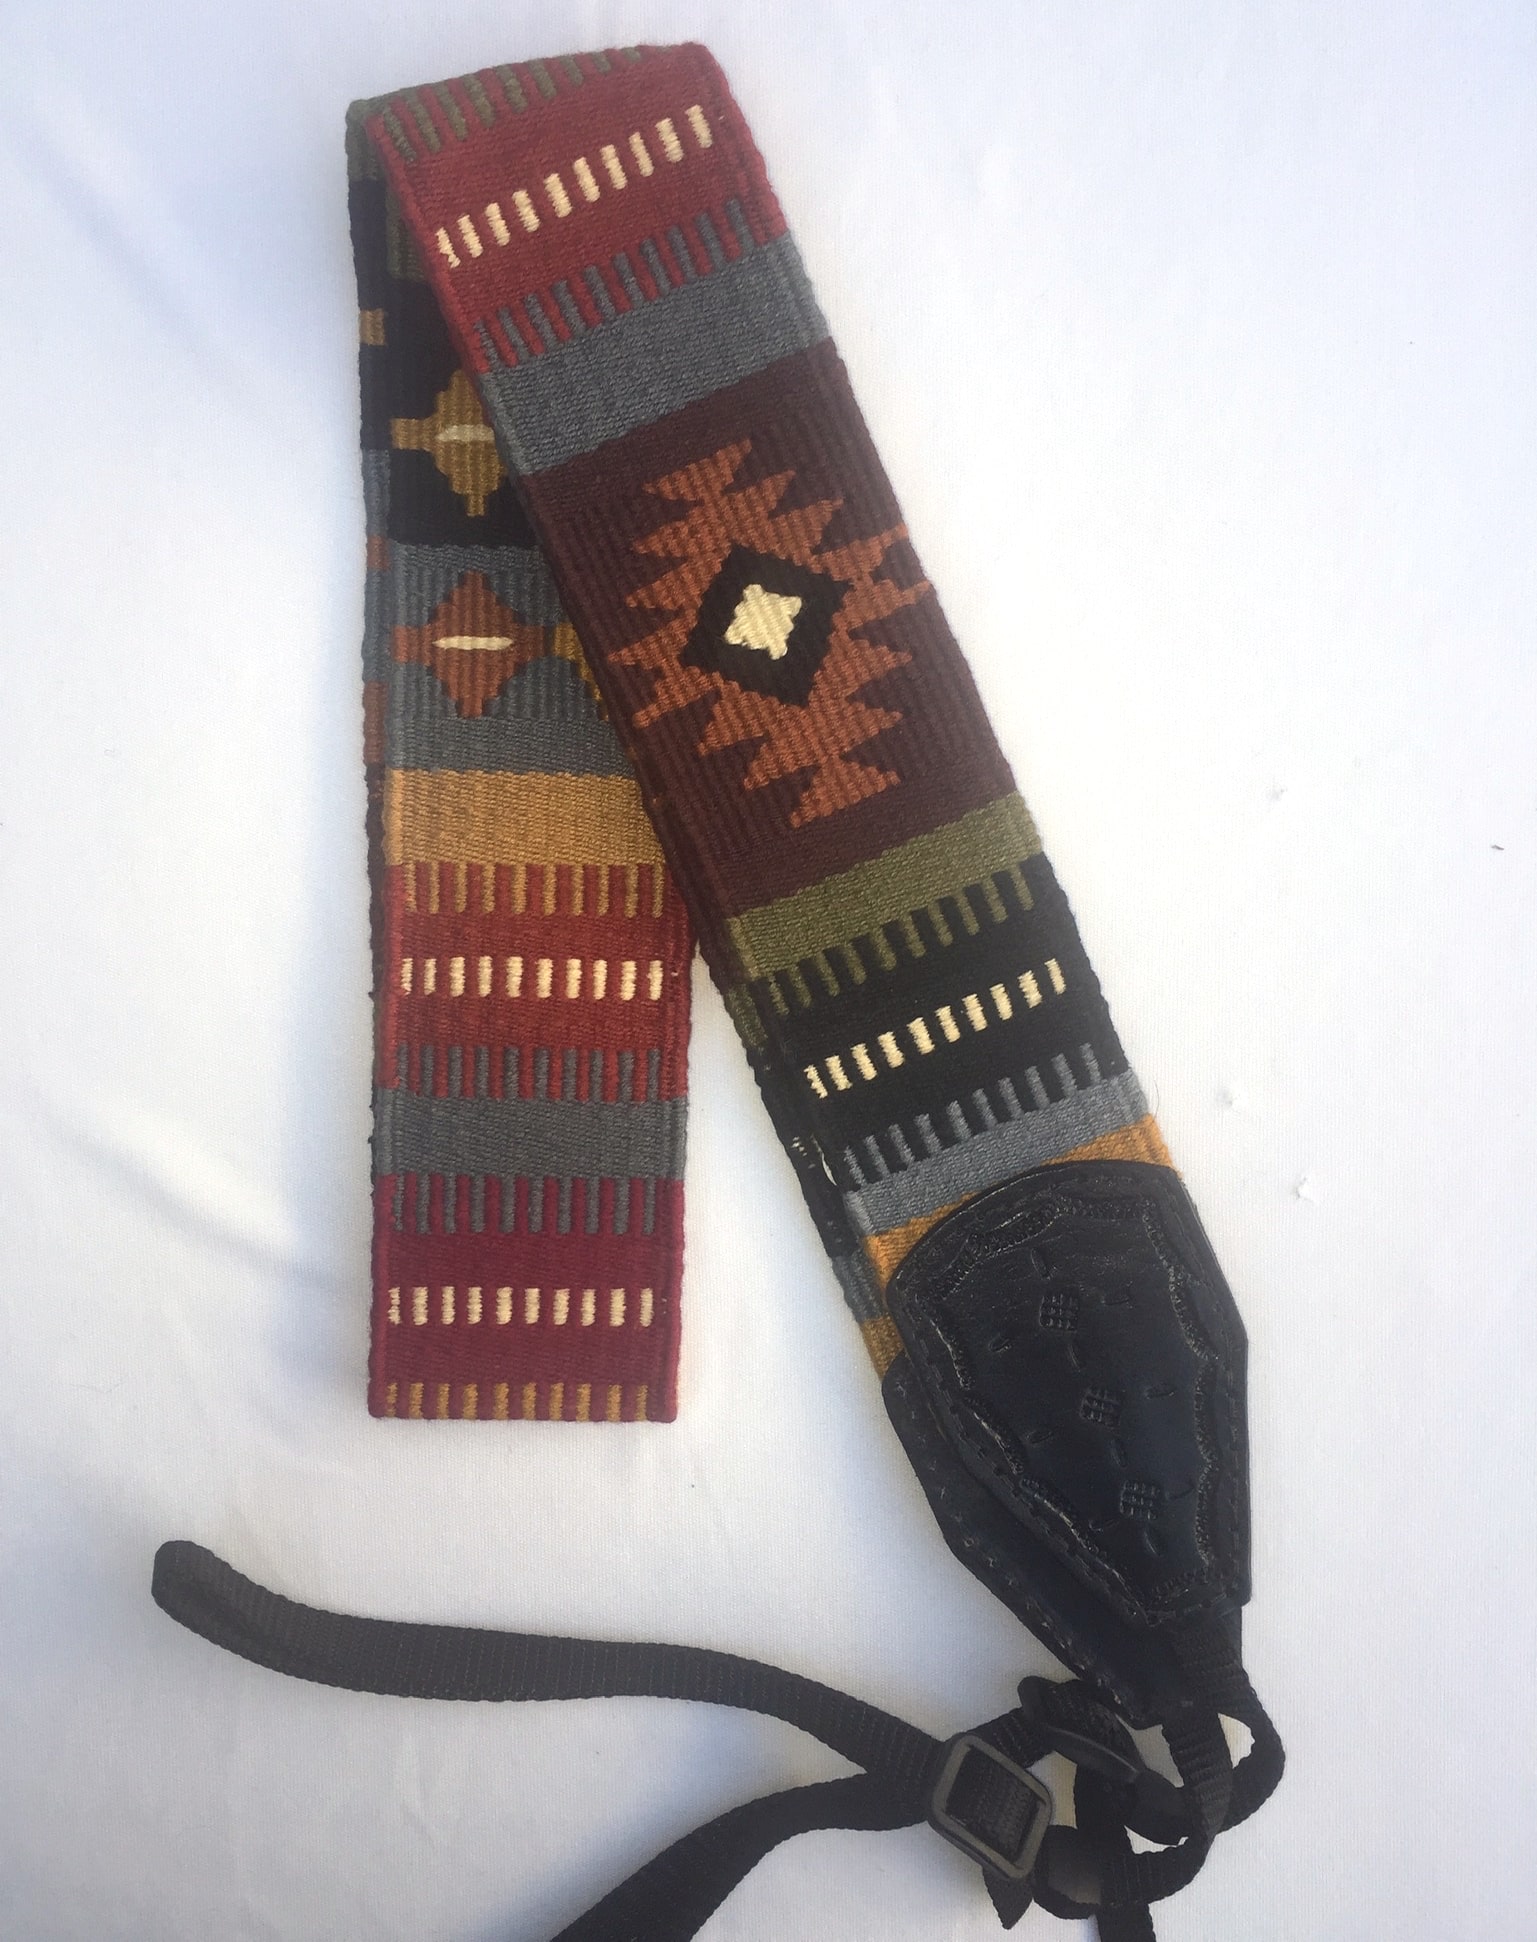 Handwoven Cotton and Leather Camera Strap - Earth Tones with Geometric Diamond Patterns